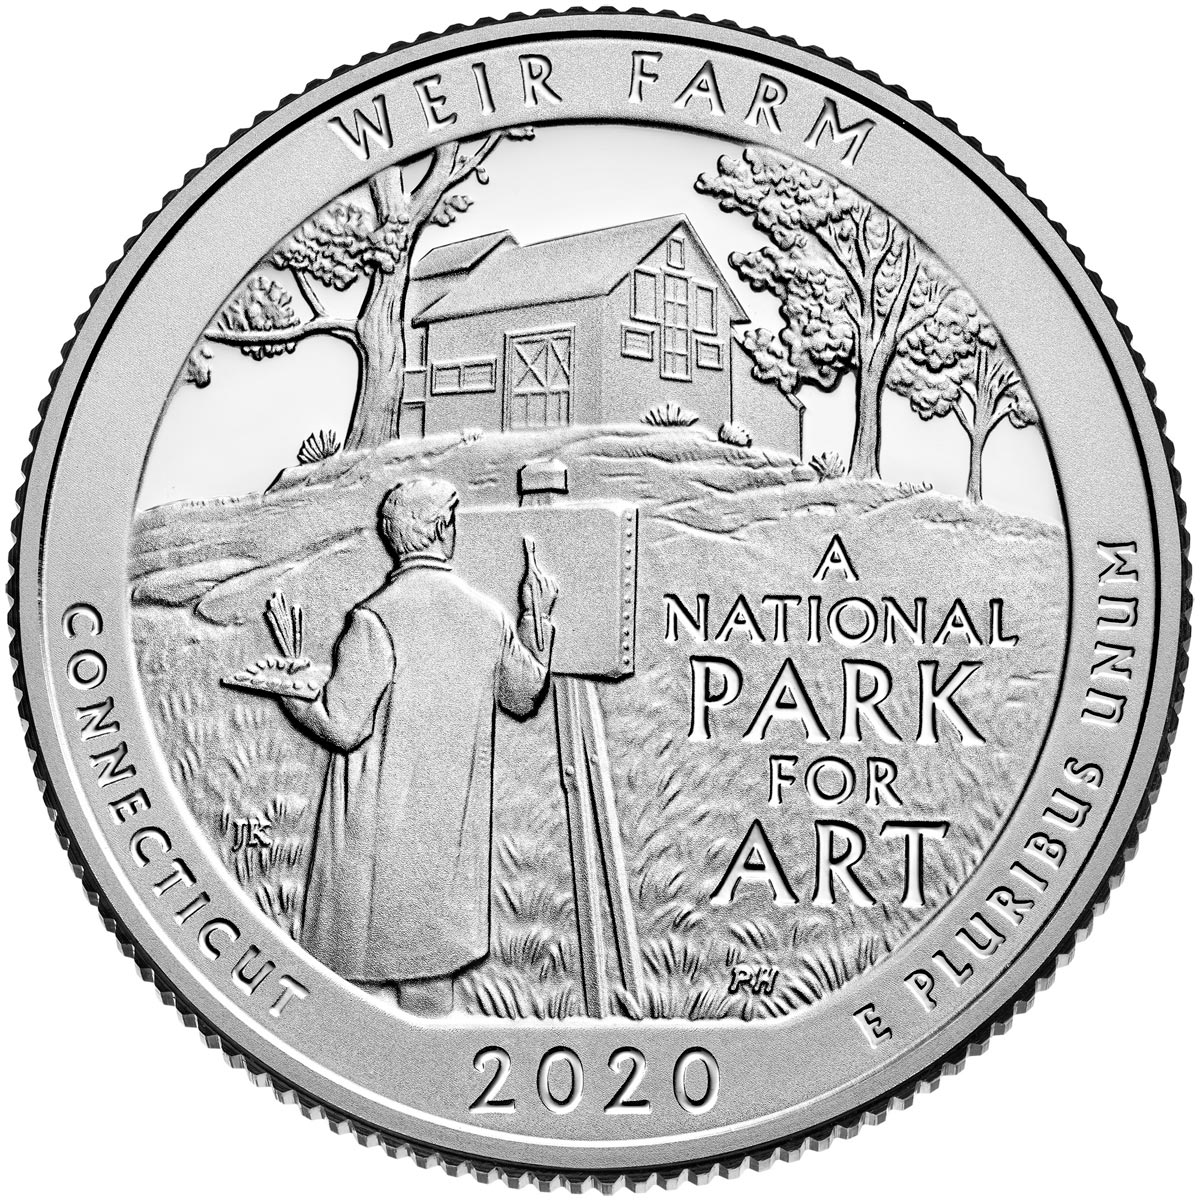 Image of 25 cents coin - Weir Farm National Historic Site | USA 2020.  The Copper–Nickel (CuNi) coin is of Proof, BU, UNC quality.